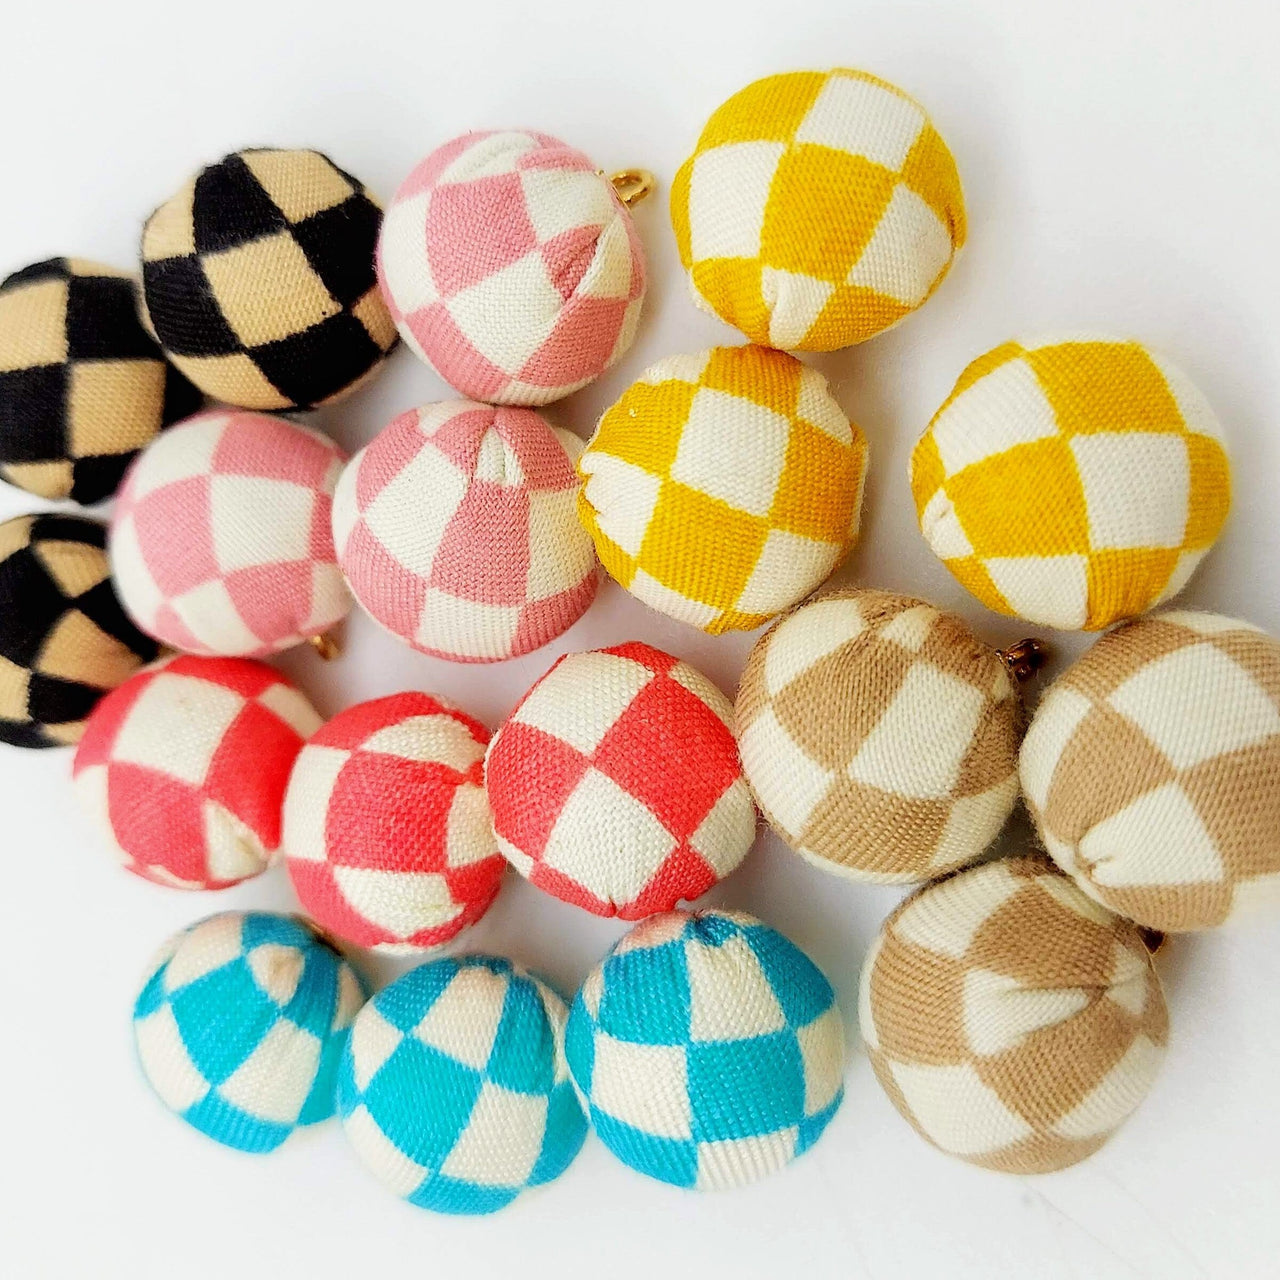 Brown and White Checkered Cotton Fabric Balls Tassel, Button with Ring Cap, Decorative Tassels